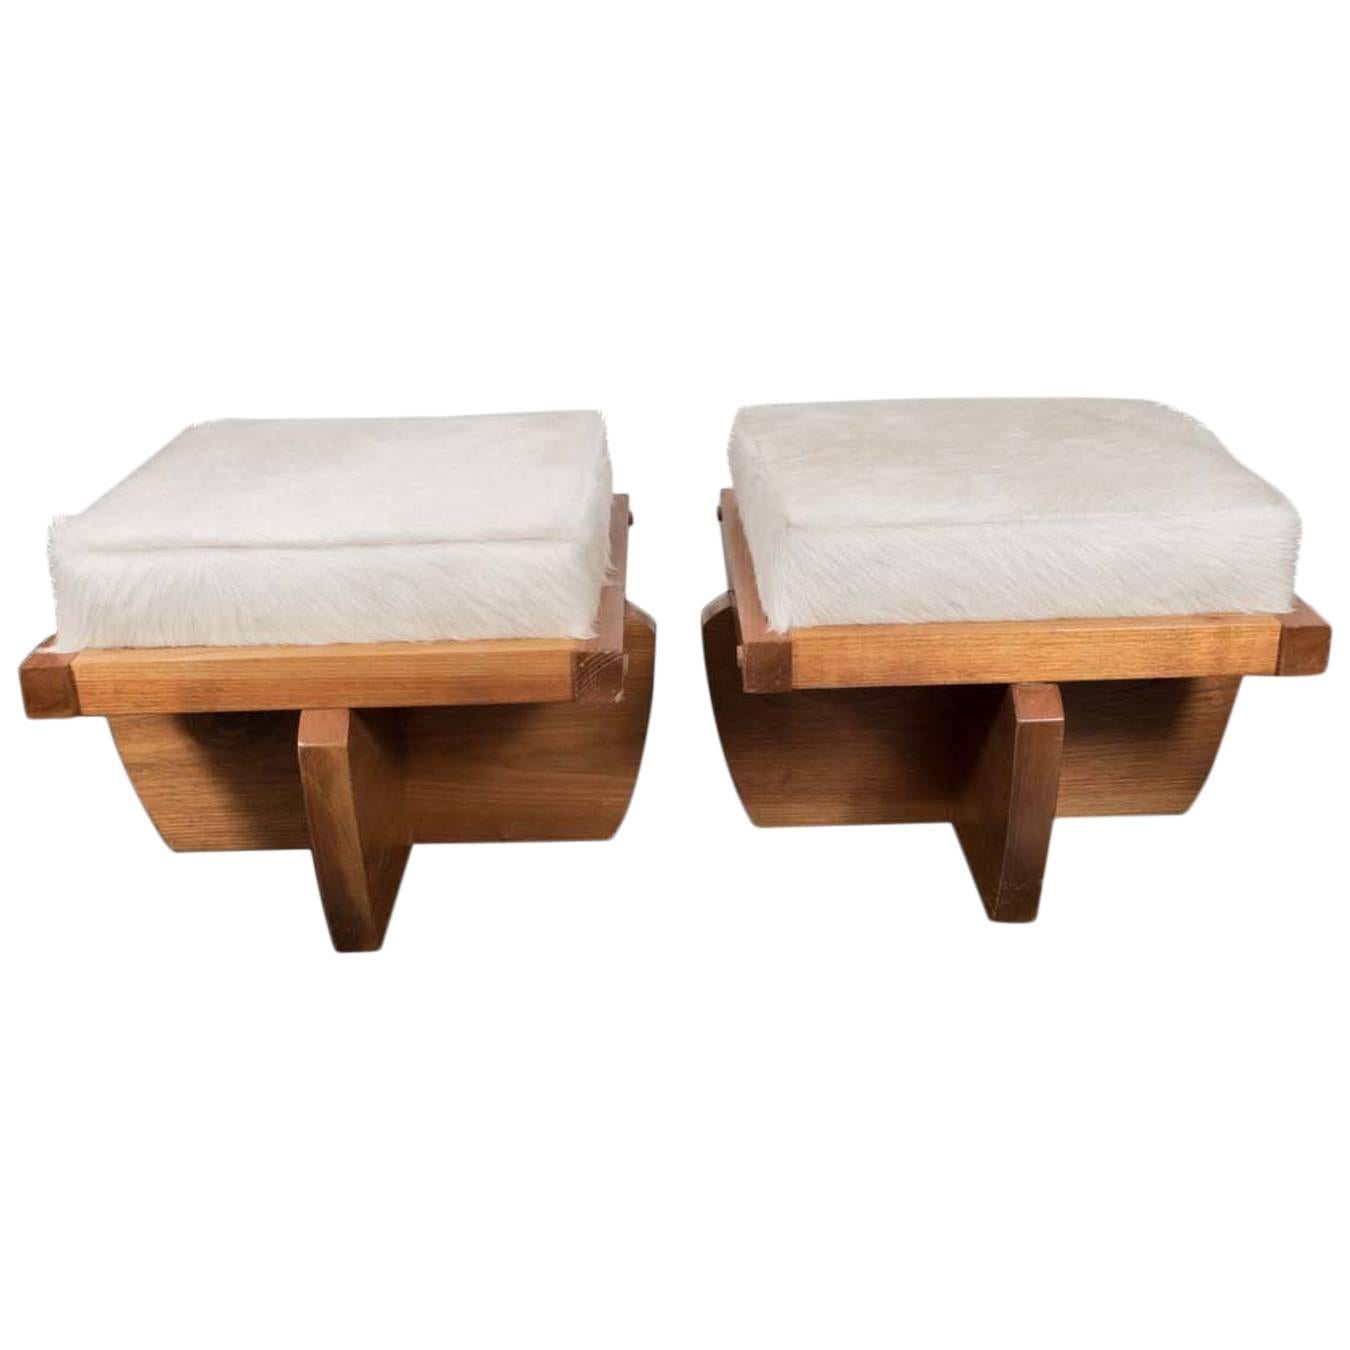 Pair of Benches in the Style of Nakashima